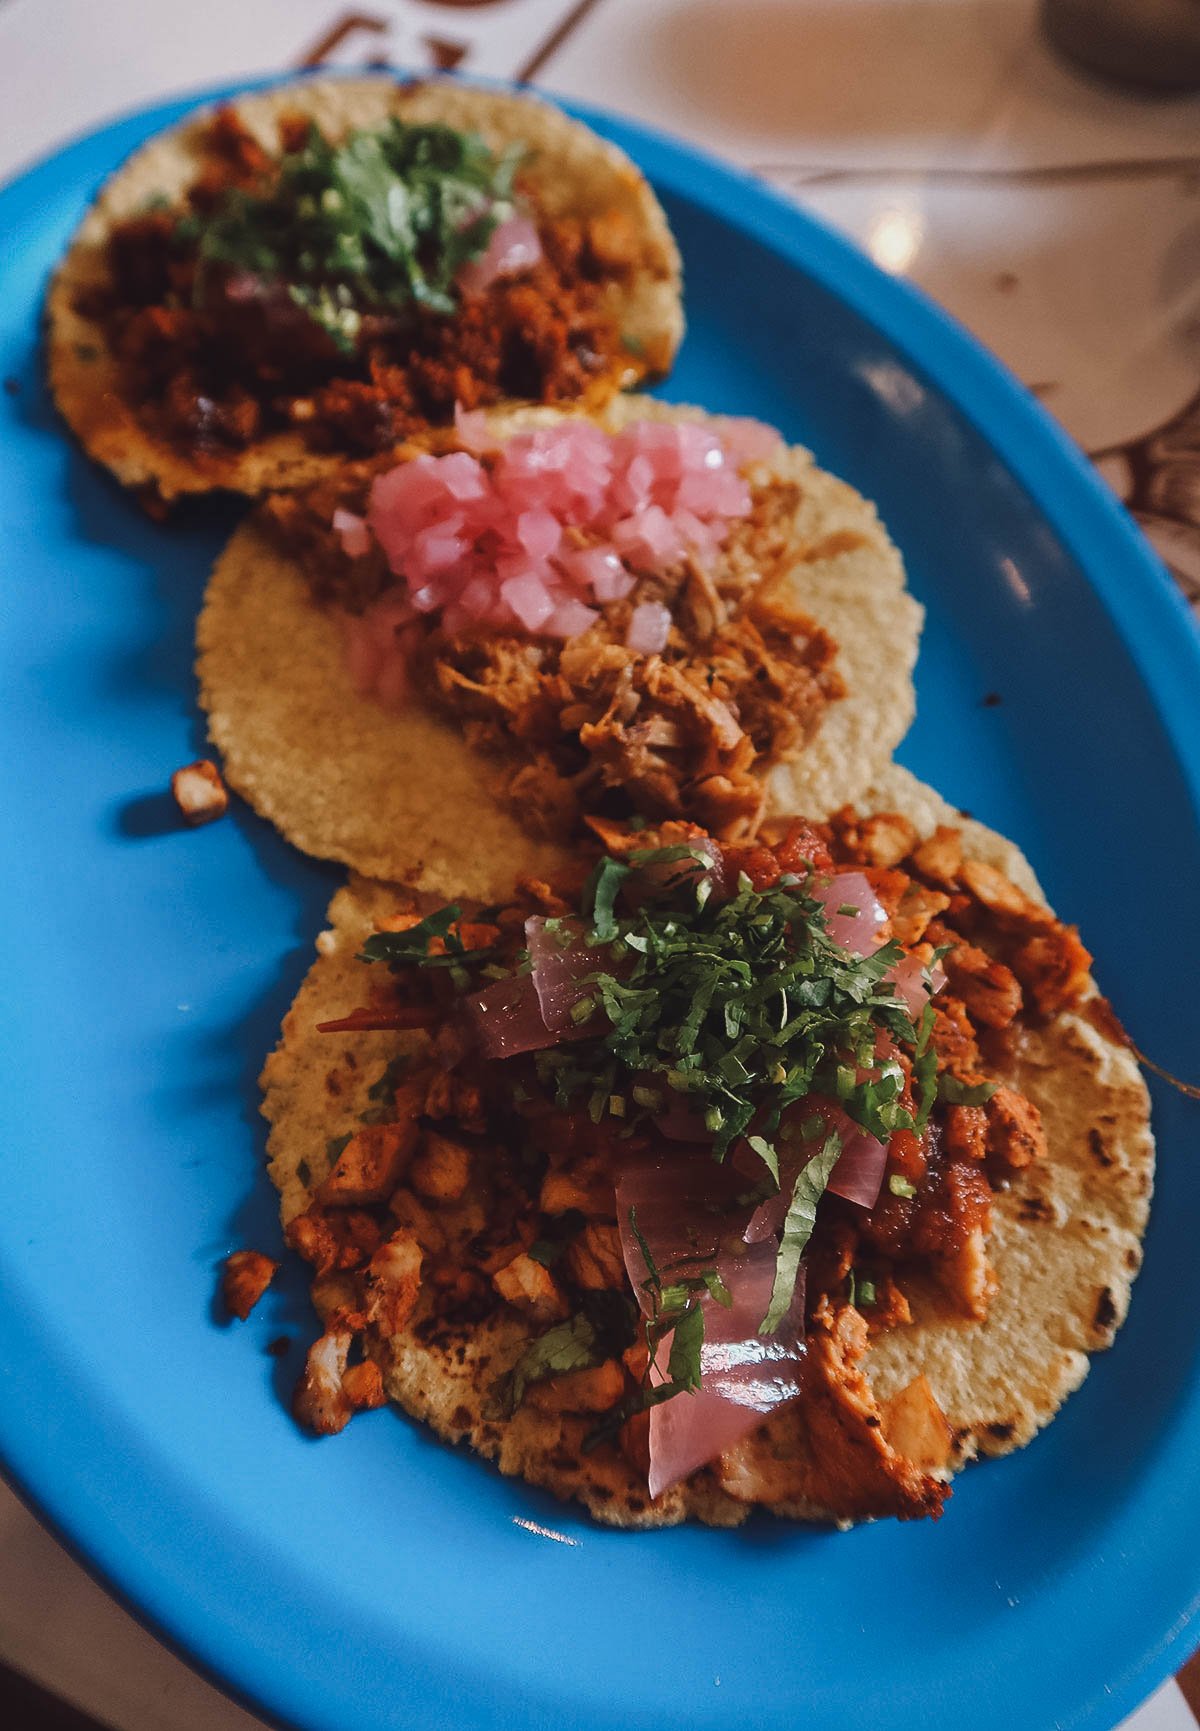 Trio of tacos from a restaurant in Merida, Mexico